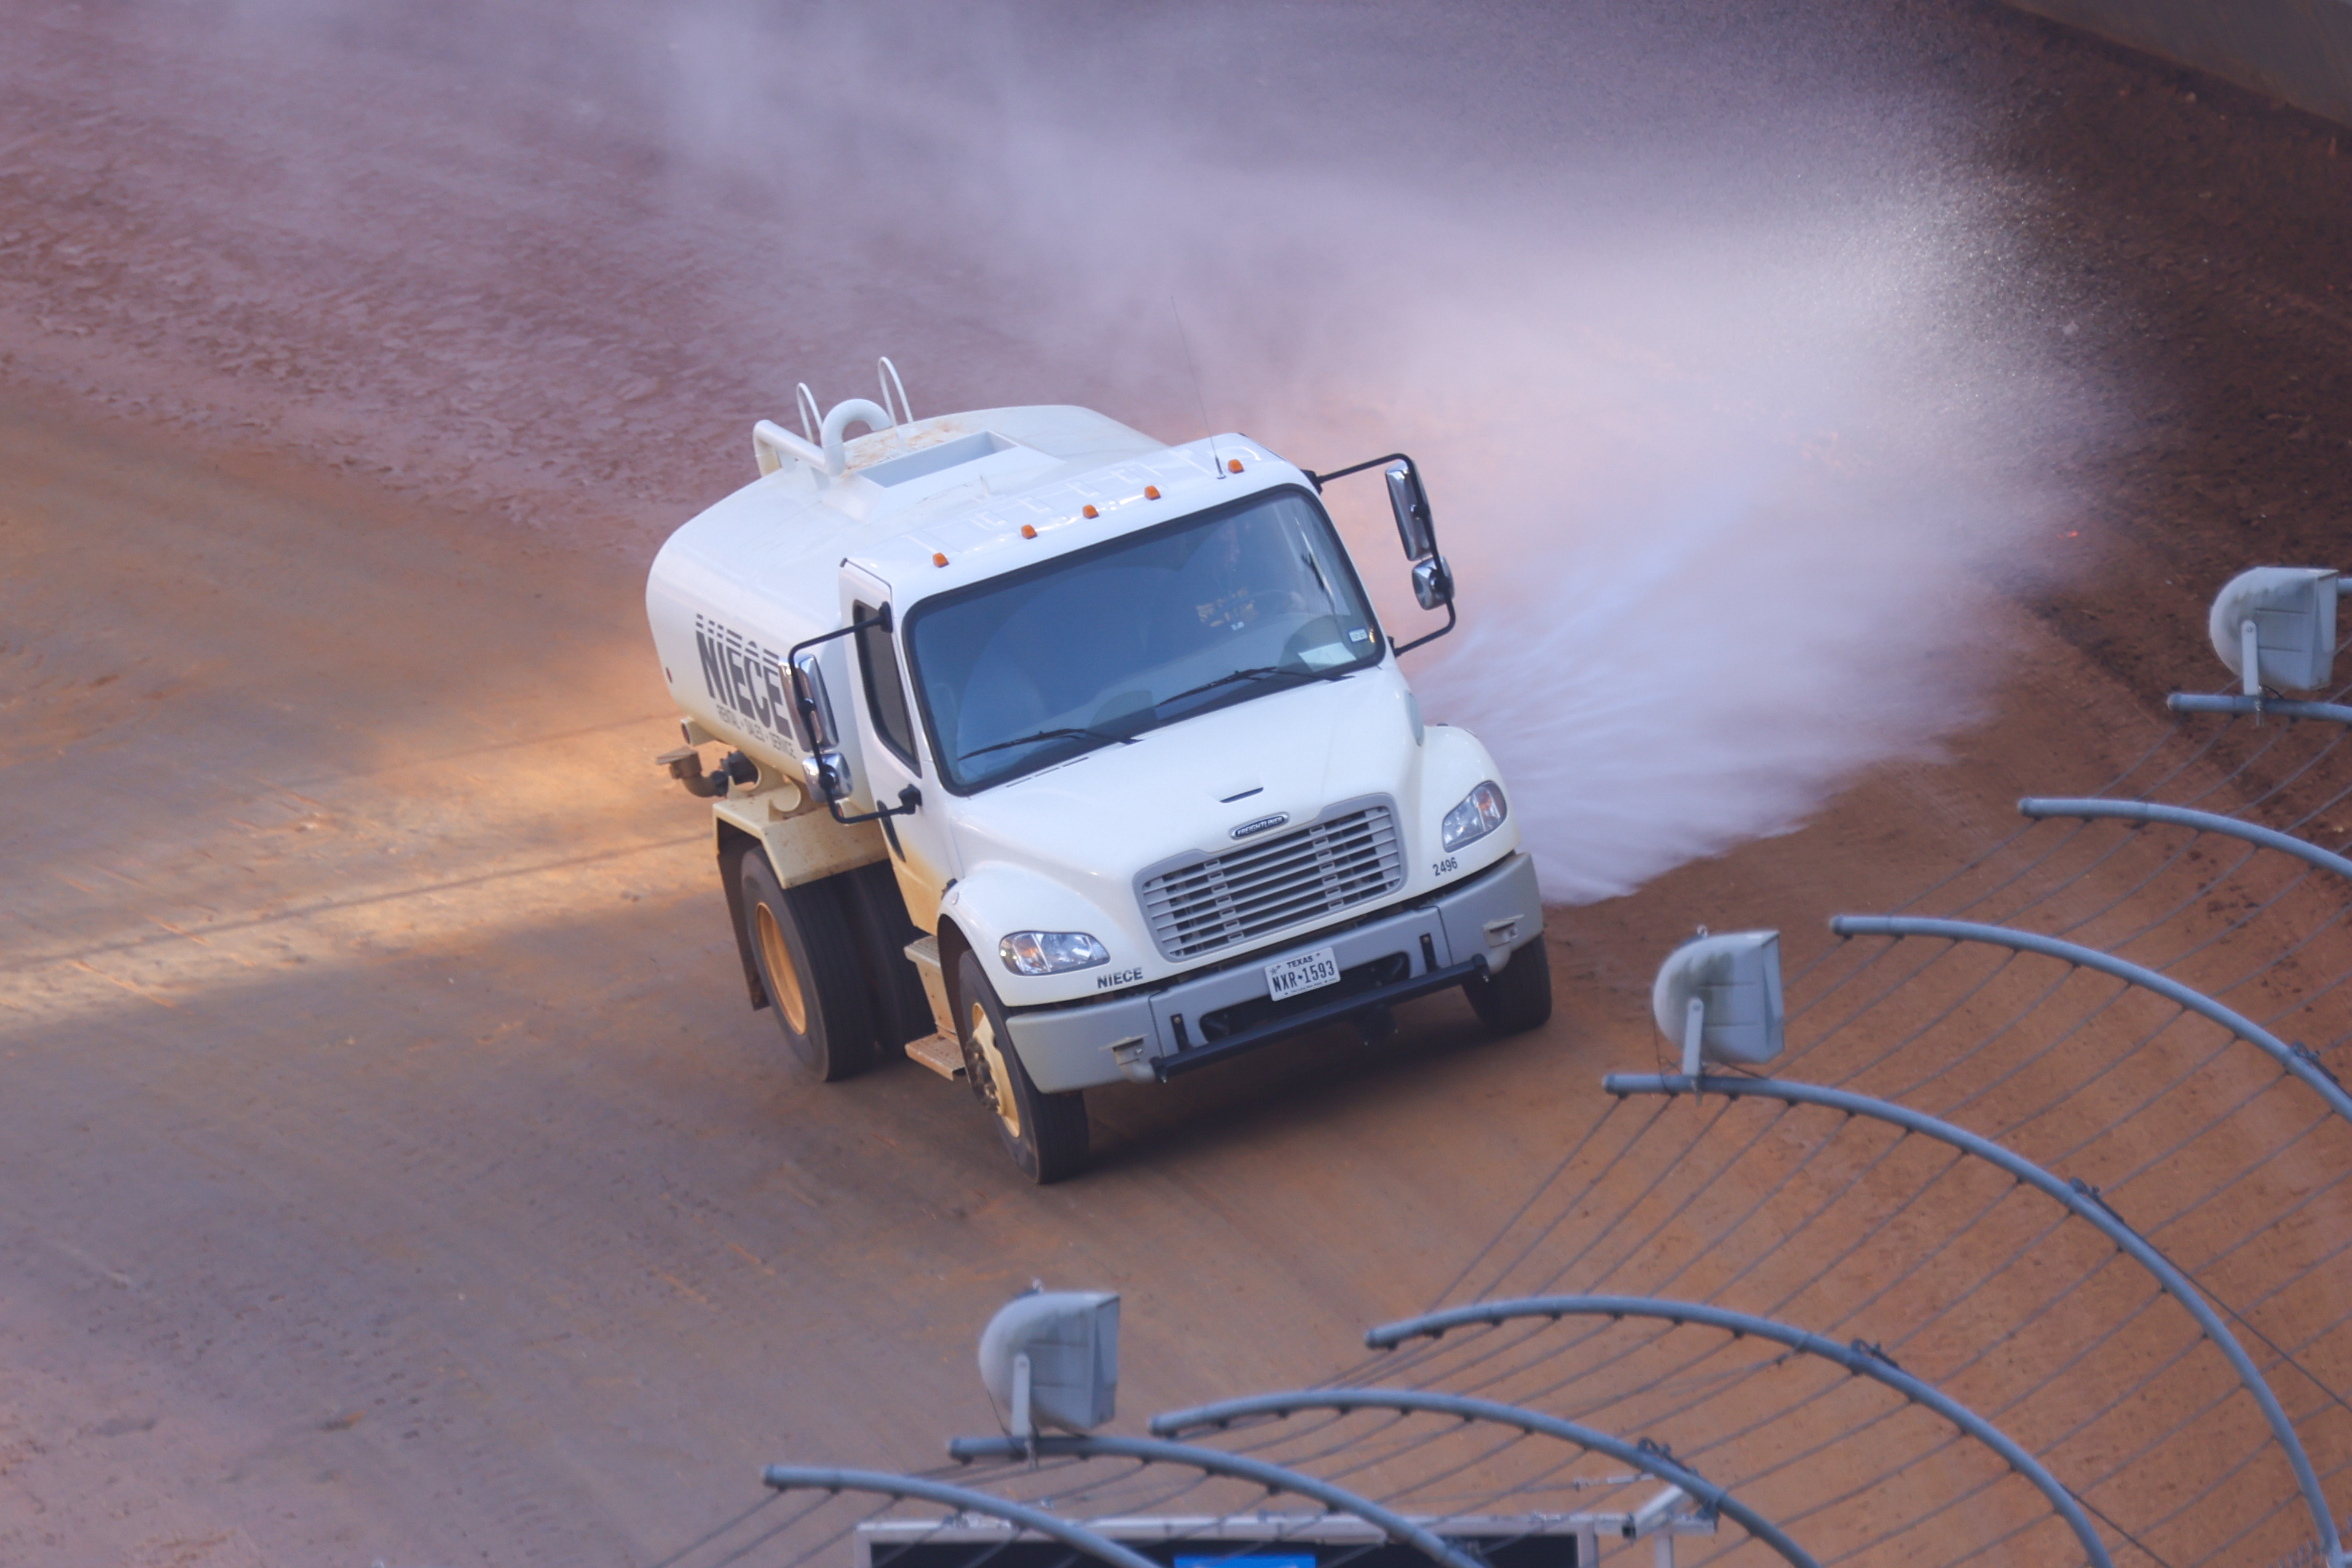 Mar 29, 2021; Bristol, TN, USA; A water truck sprays water on the track during the NASCAR Food City Dirt Race at Bristol Motor Speedway. Mandatory Credit: Randy Sartin-USA TODAY Sports